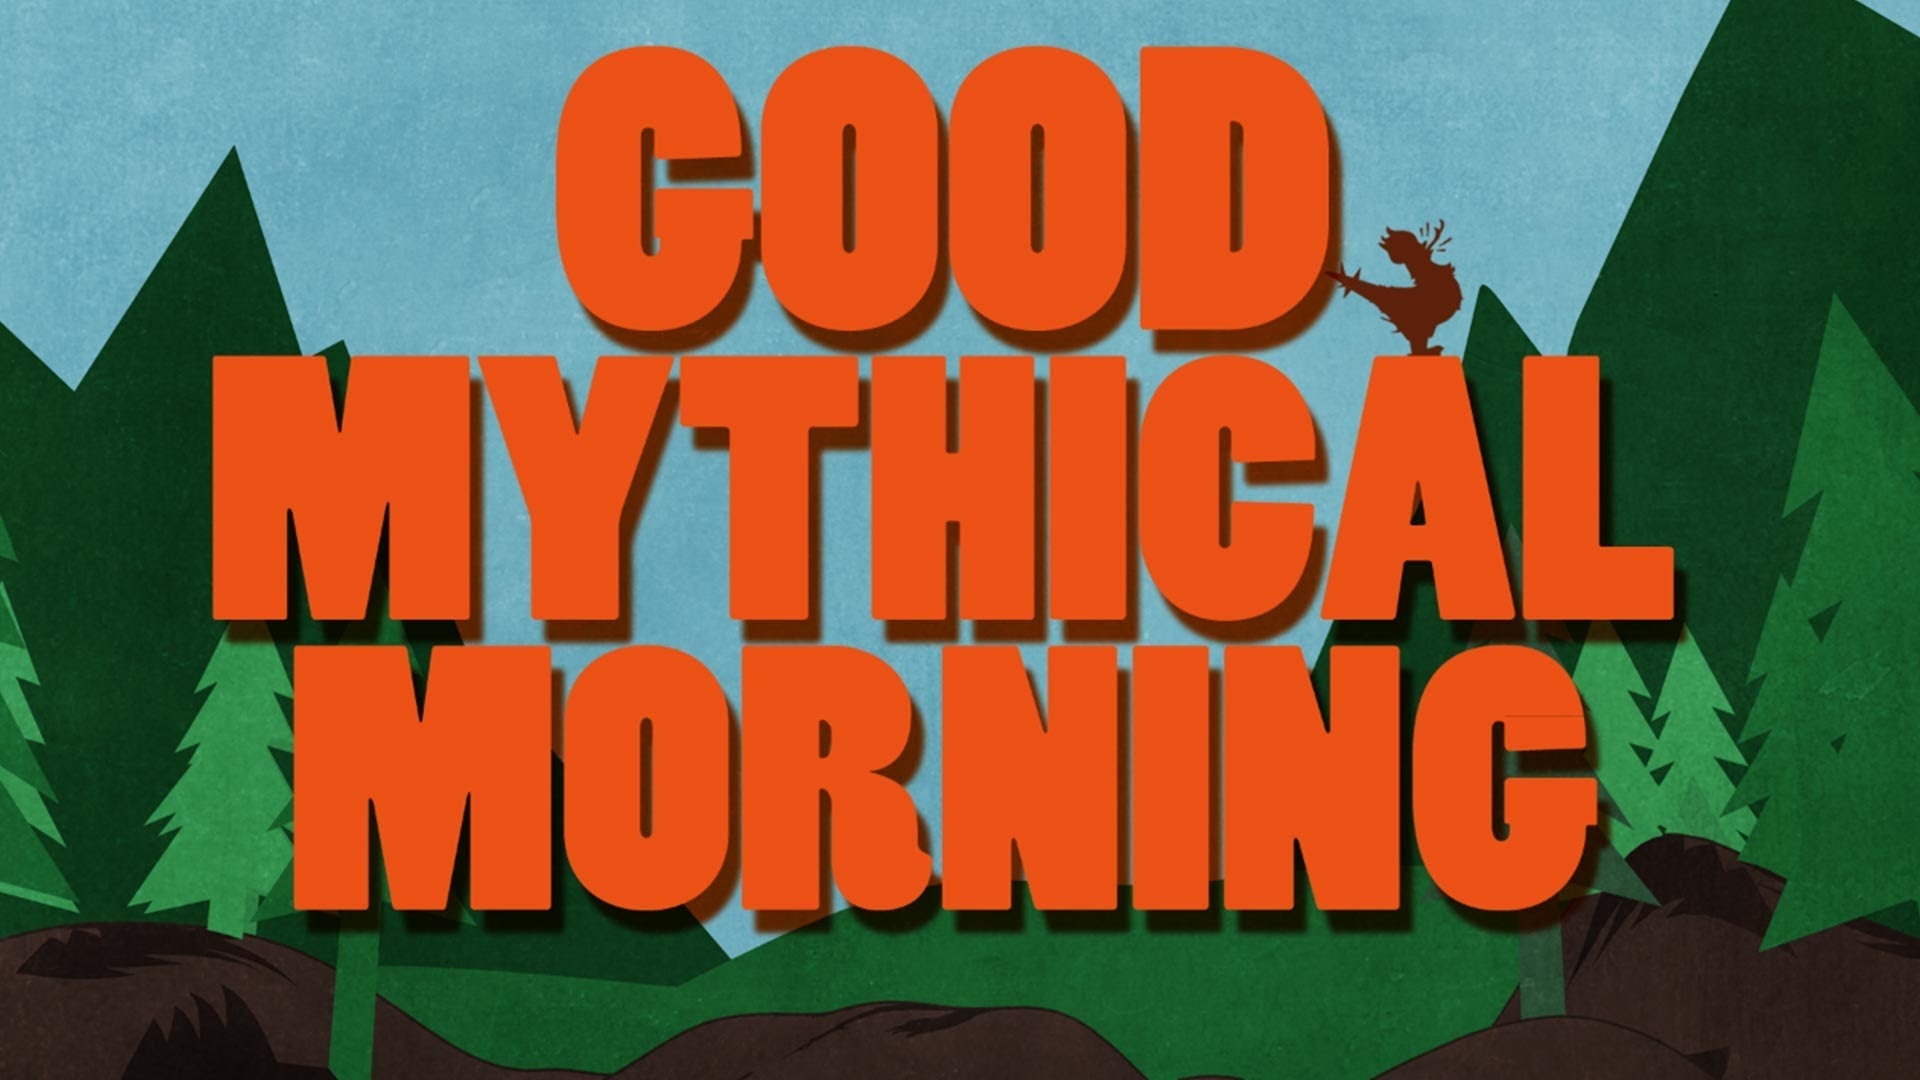 Good Mythical Morning: A fun, engaging web series produced in the United States since 2012, Comedy talk show. 1920x1080 Full HD Wallpaper.